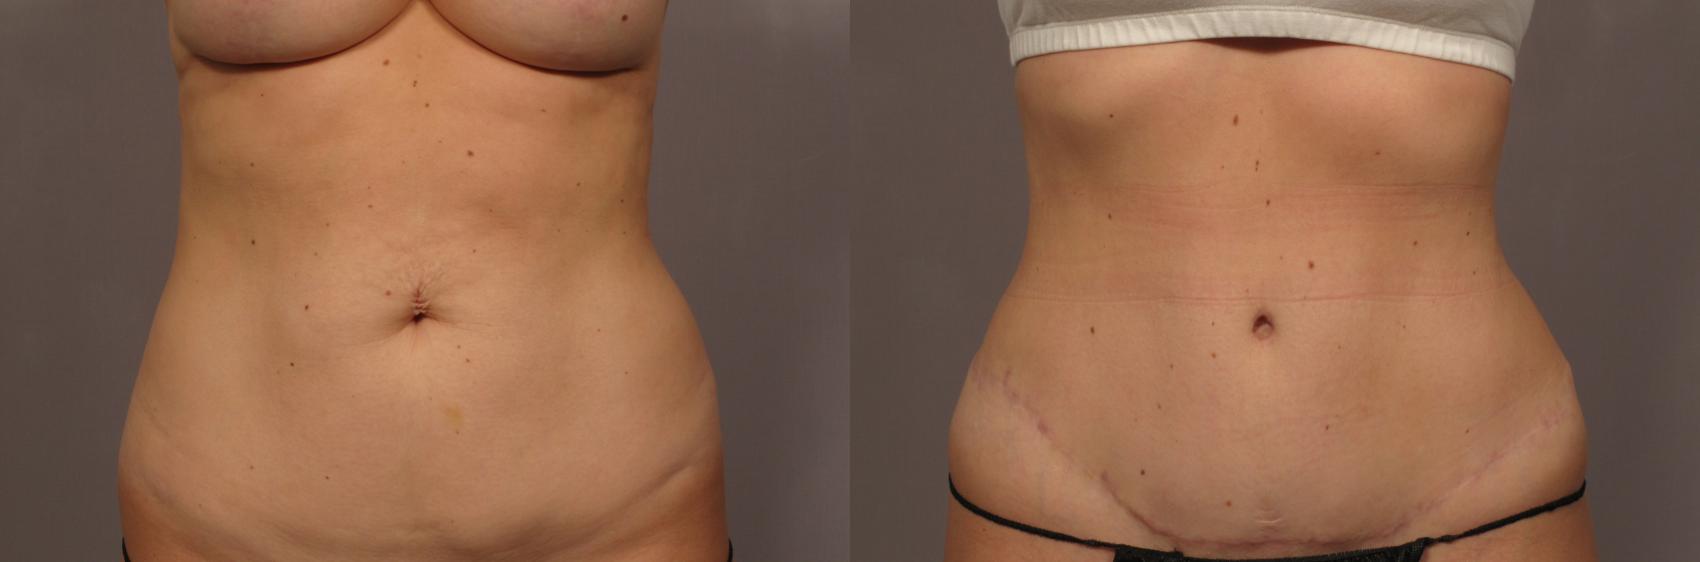 Tummy Tuck, Frontal View, Before and After 1 year photos, Dr. Kent Hasen